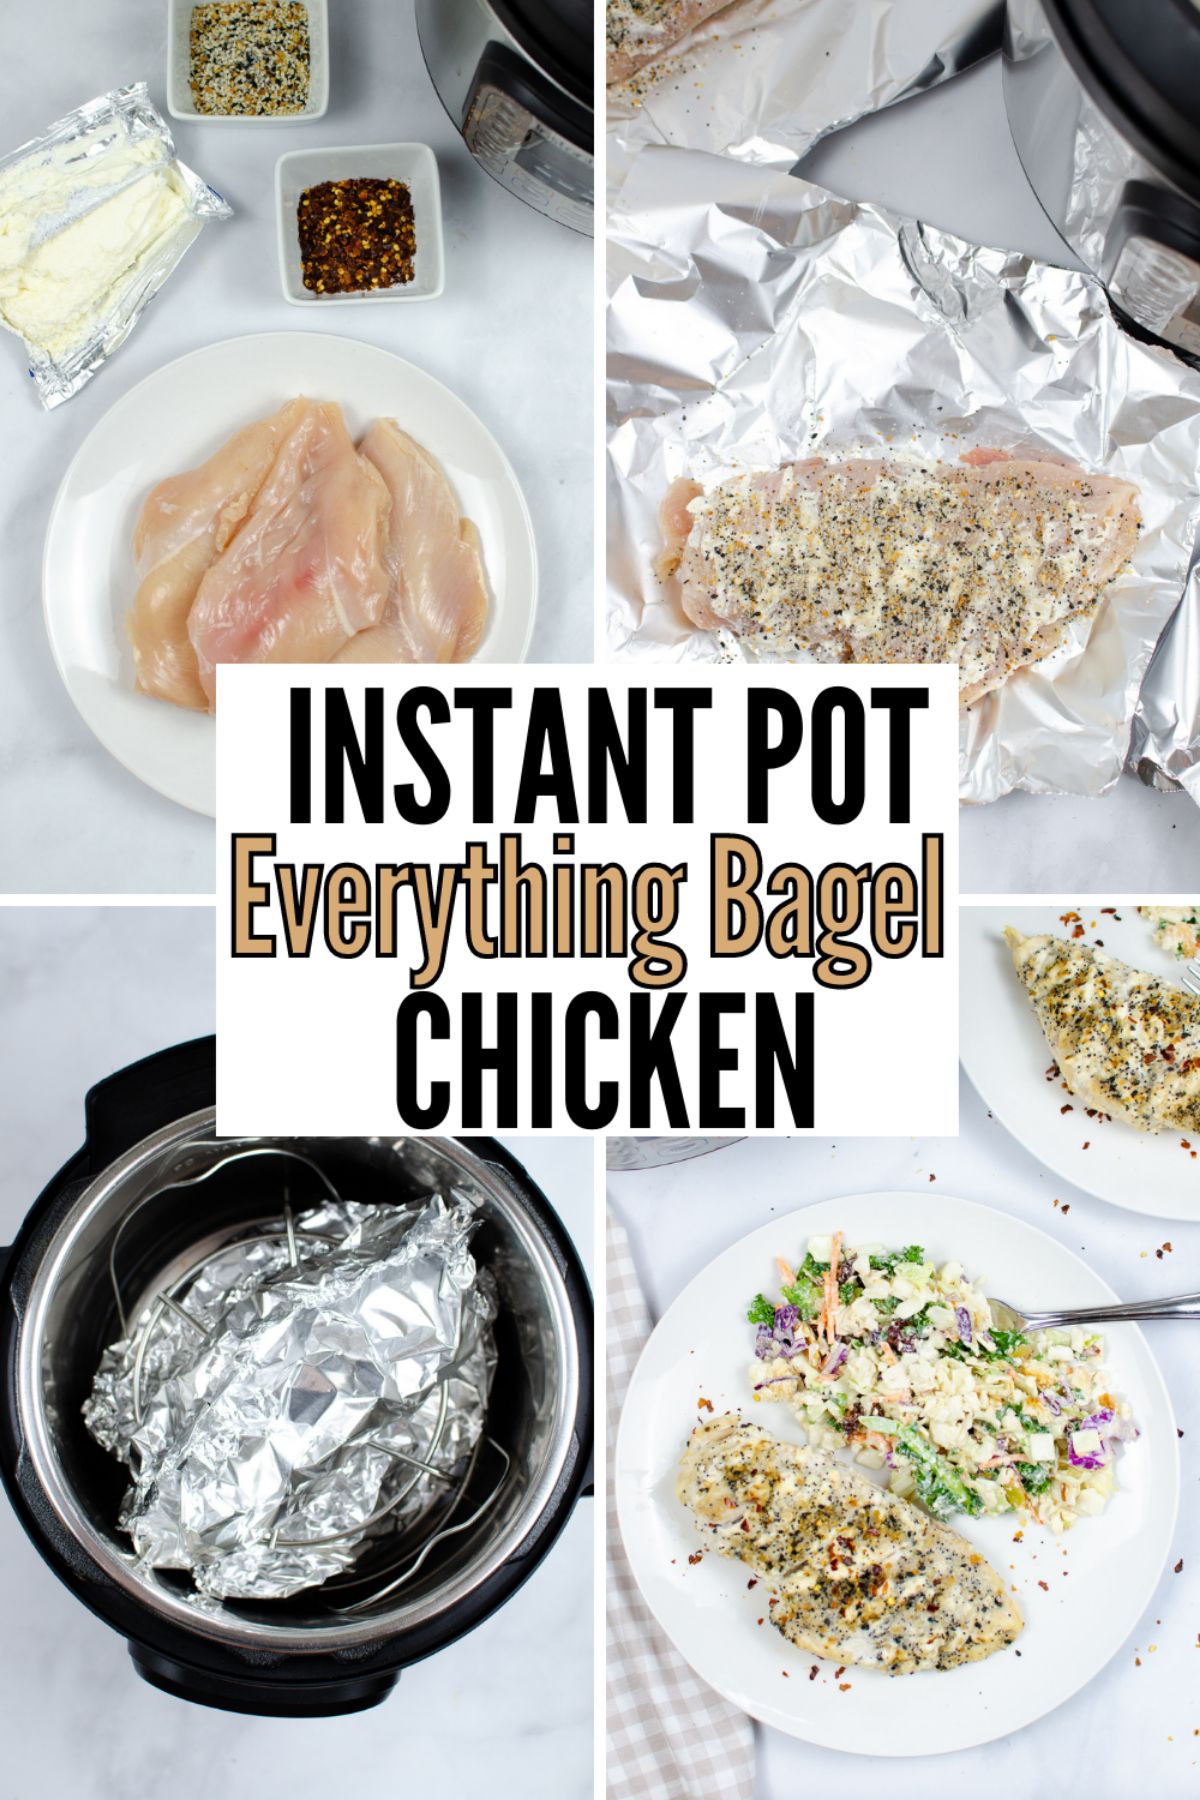 Instant Pot Cream Cheese Chicken is an easy recipe that needs a few ingredients & less than an hour to make. It’s keto & low-carb friendly. #instantpot #pressurecooker #creamcheesechicken #everythingbagel #chicken via @wondermomwannab